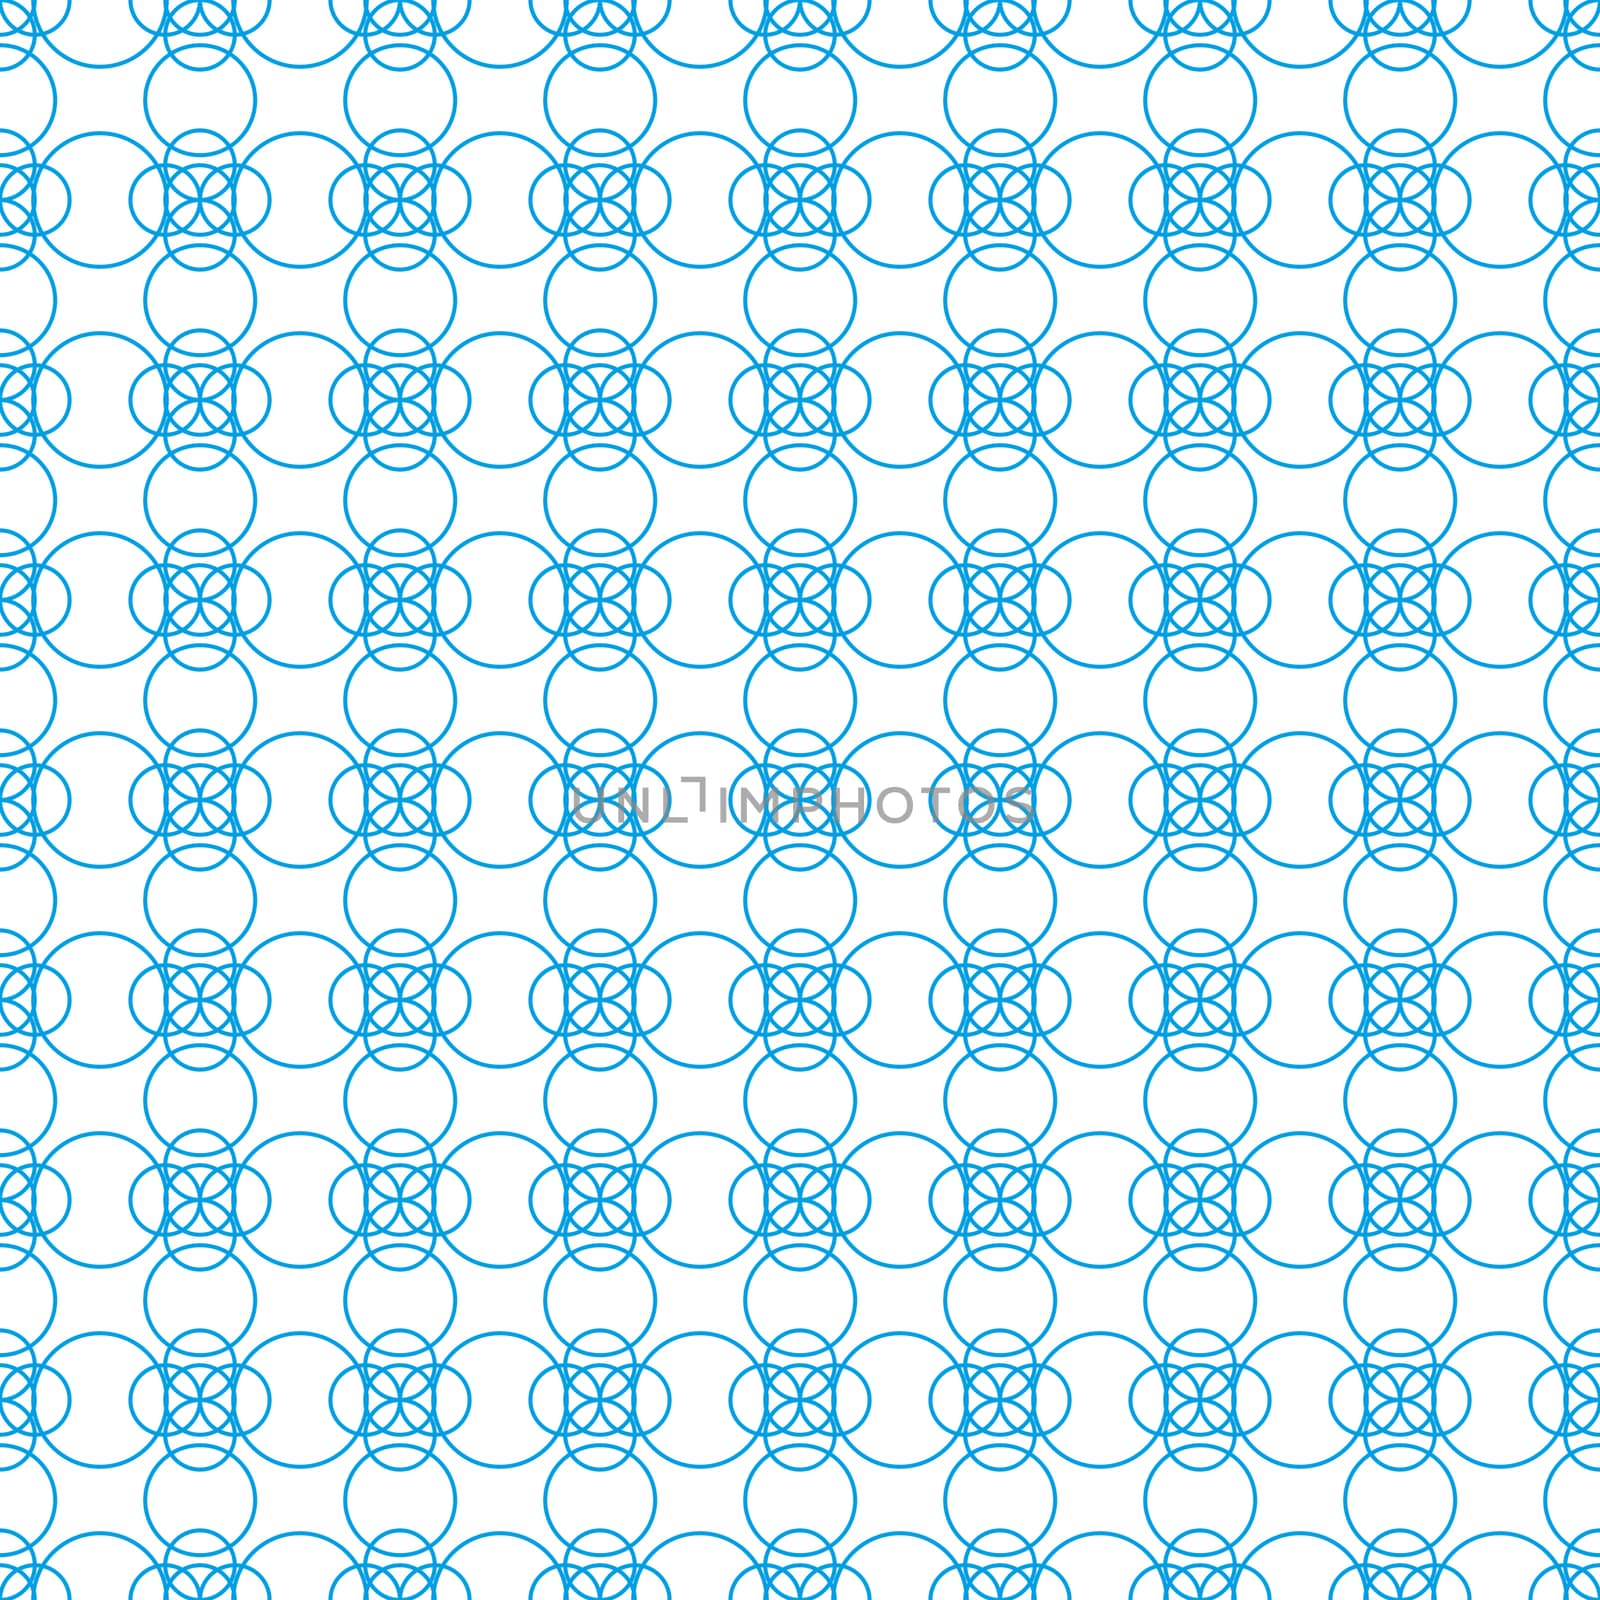 Seamless pattern of figures of arbitrary shape on a white backgr by Grommik